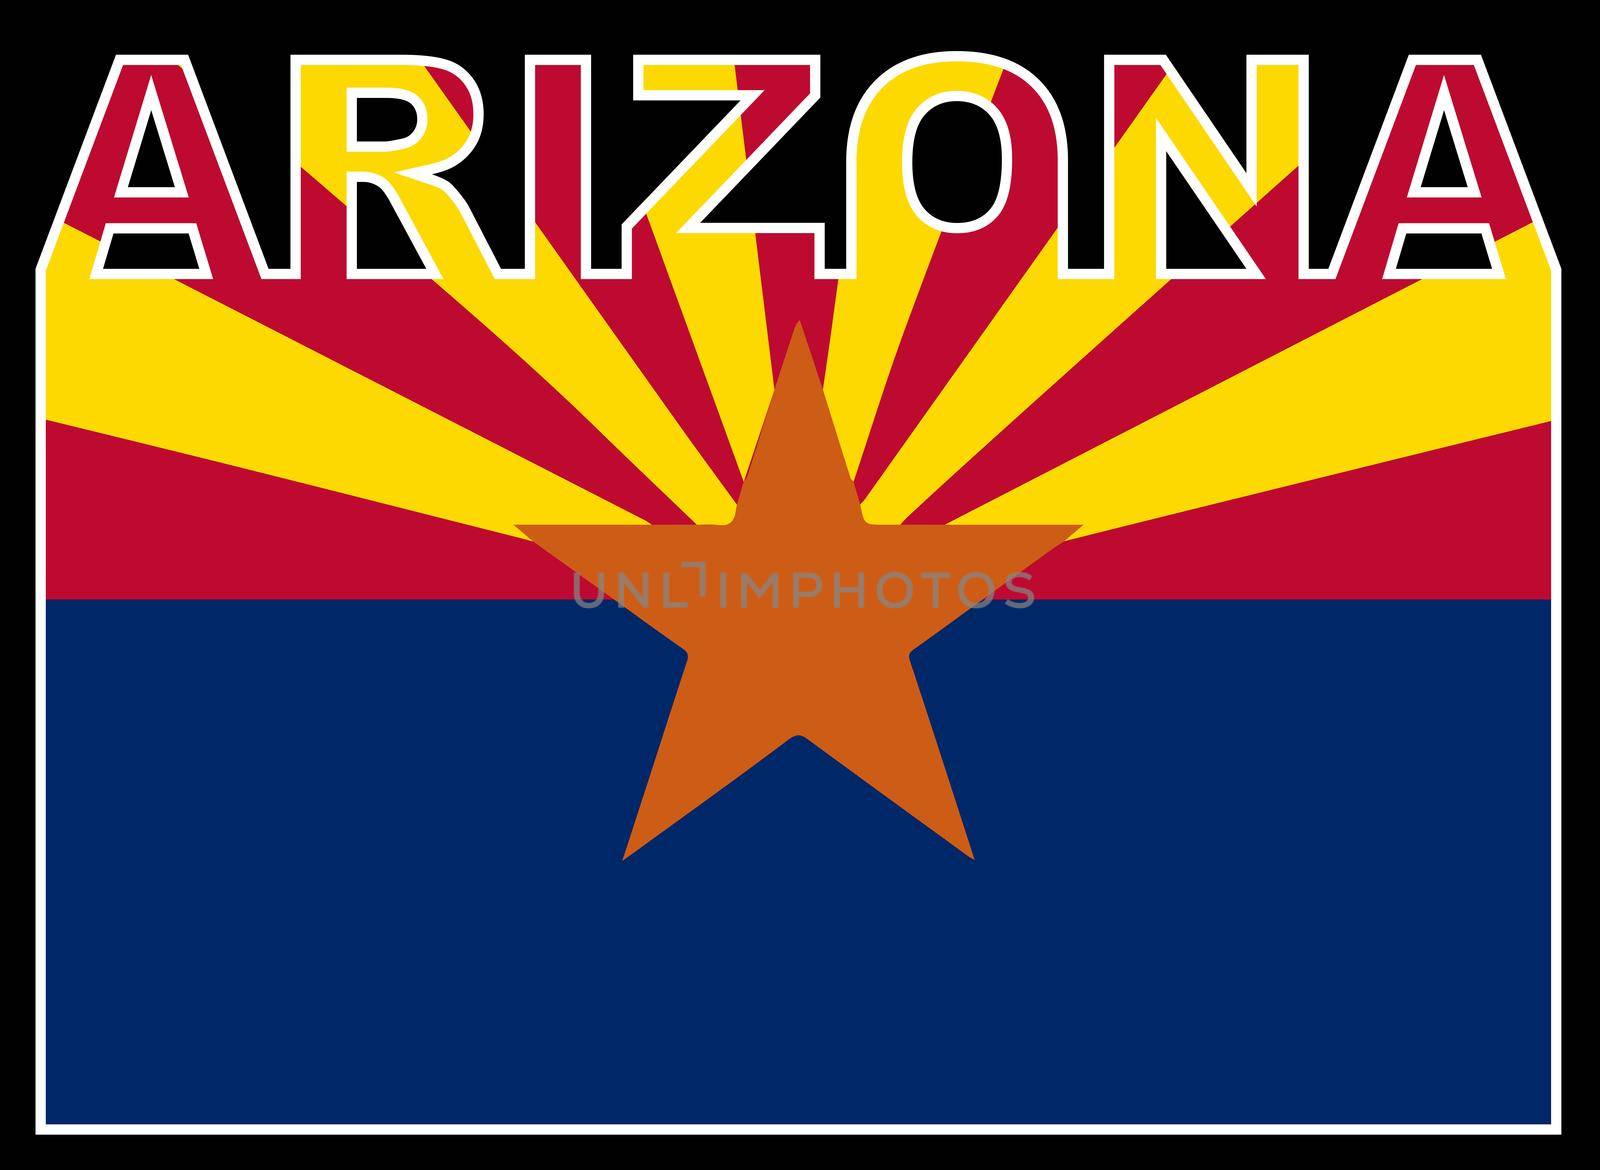 Arizona Text in silhouette set over the state flag